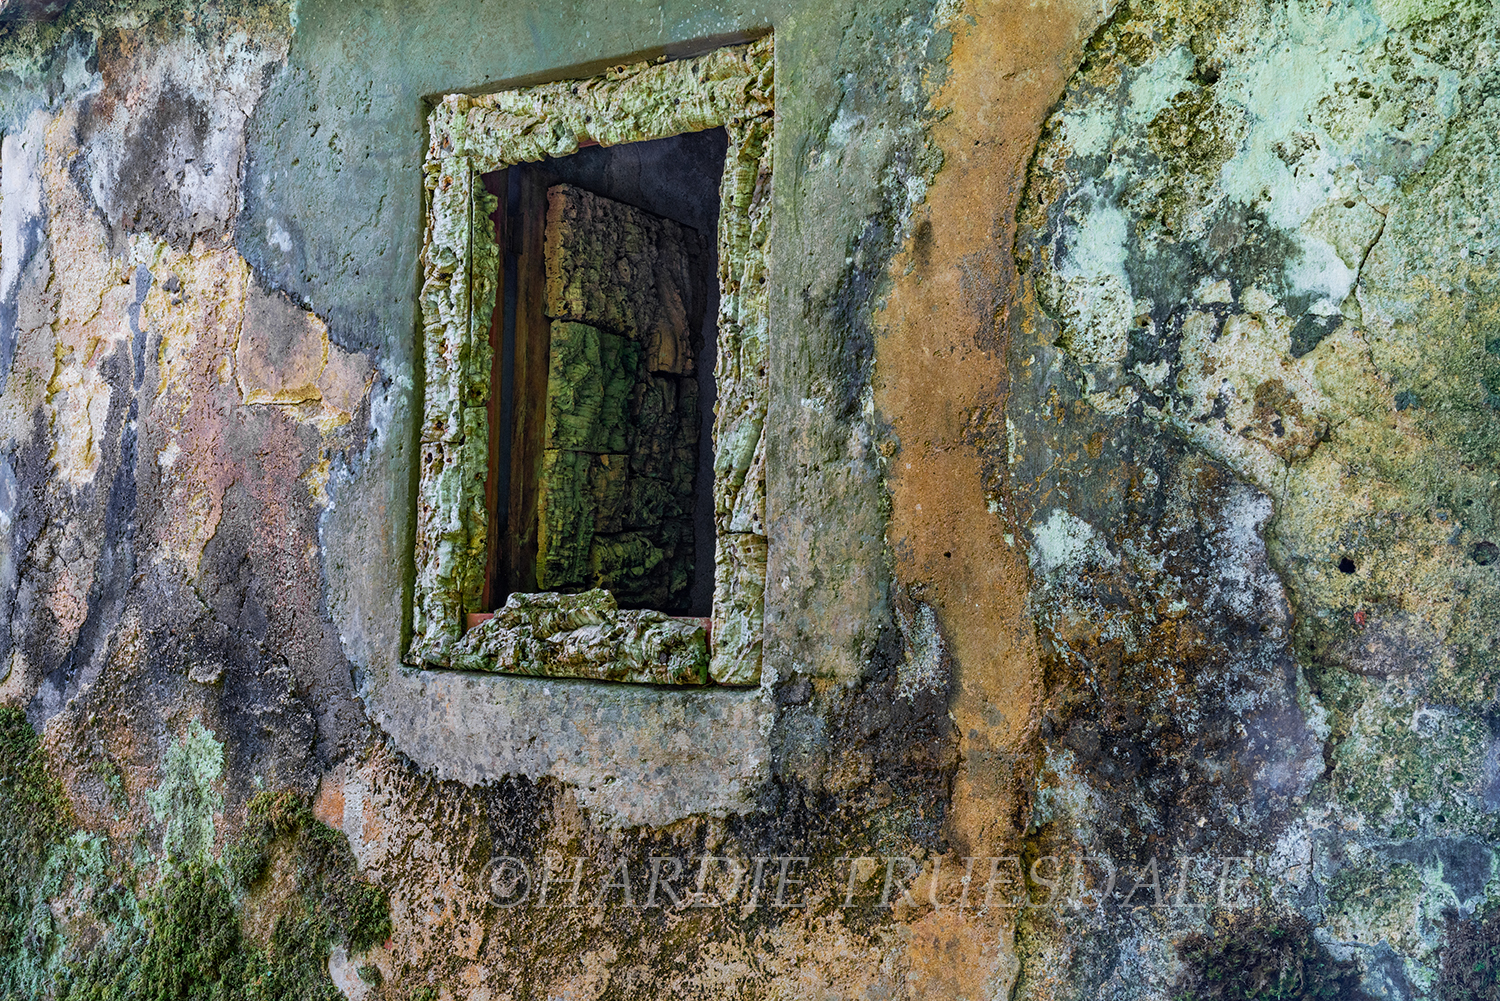 PT#002 "Old Window" Convent of the Capuchos (1560), Sintra